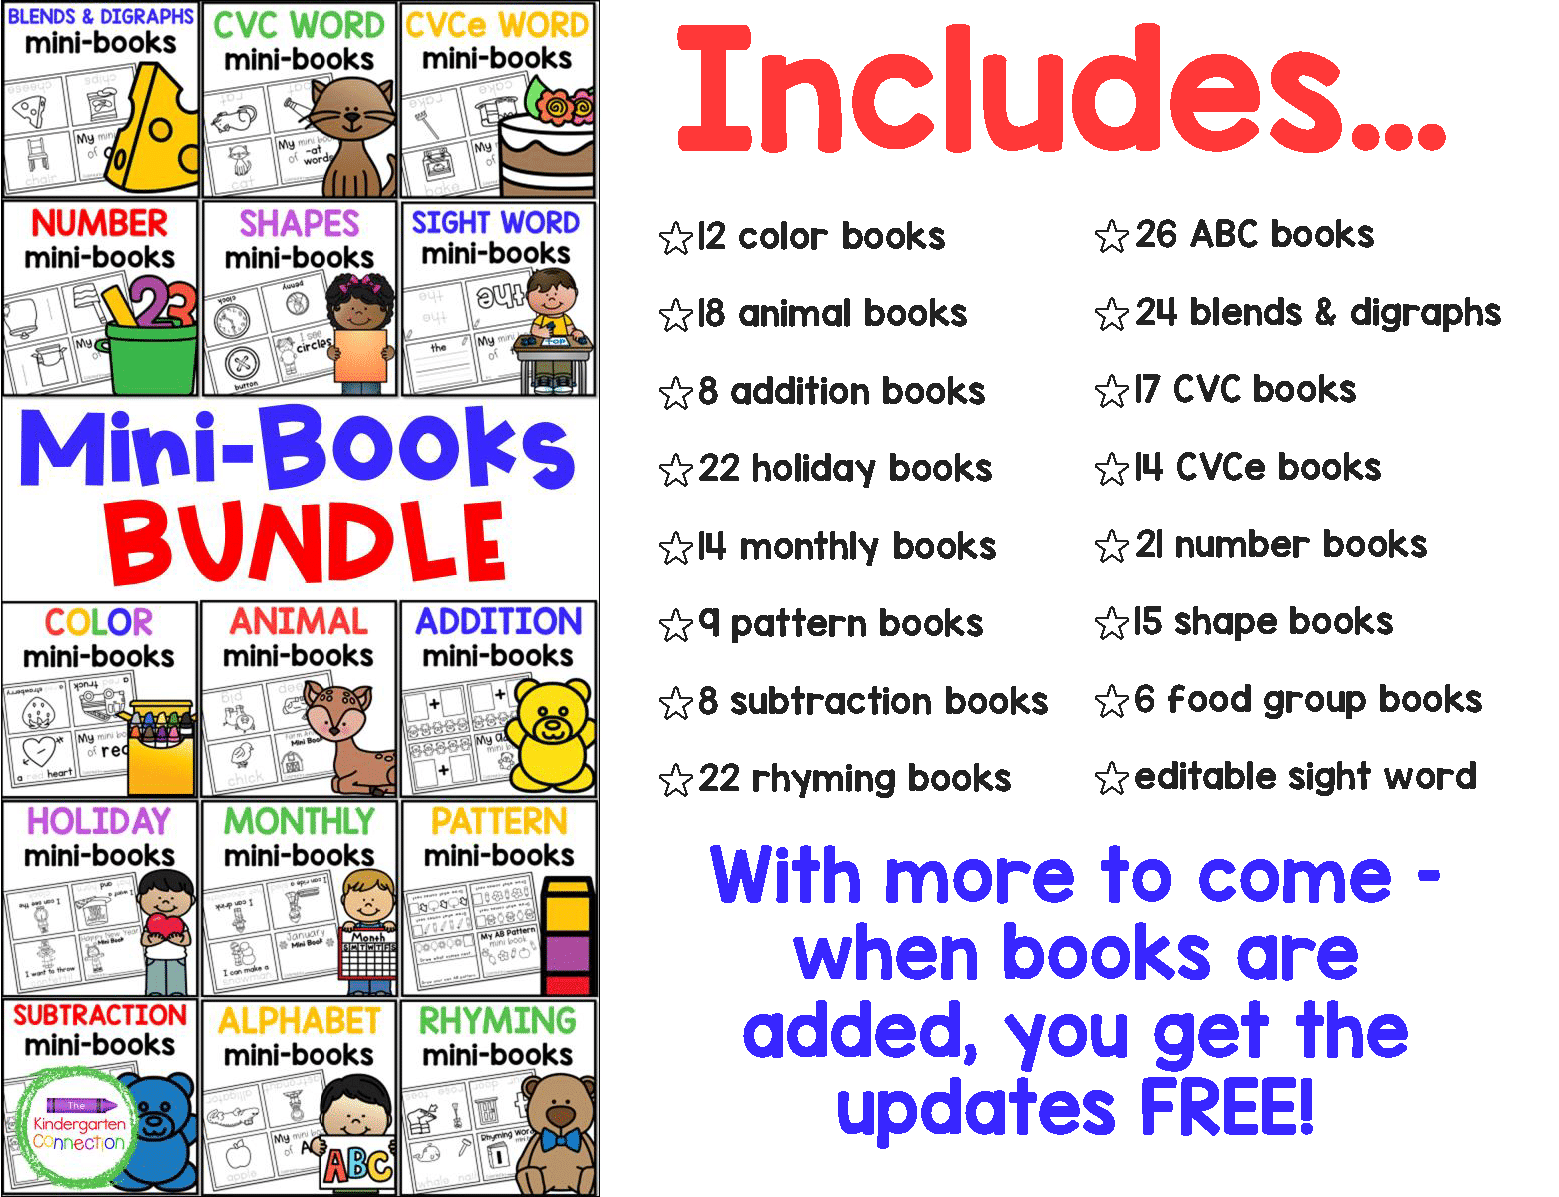 This bundle includes over 200 printable mini-books and it is still growing!